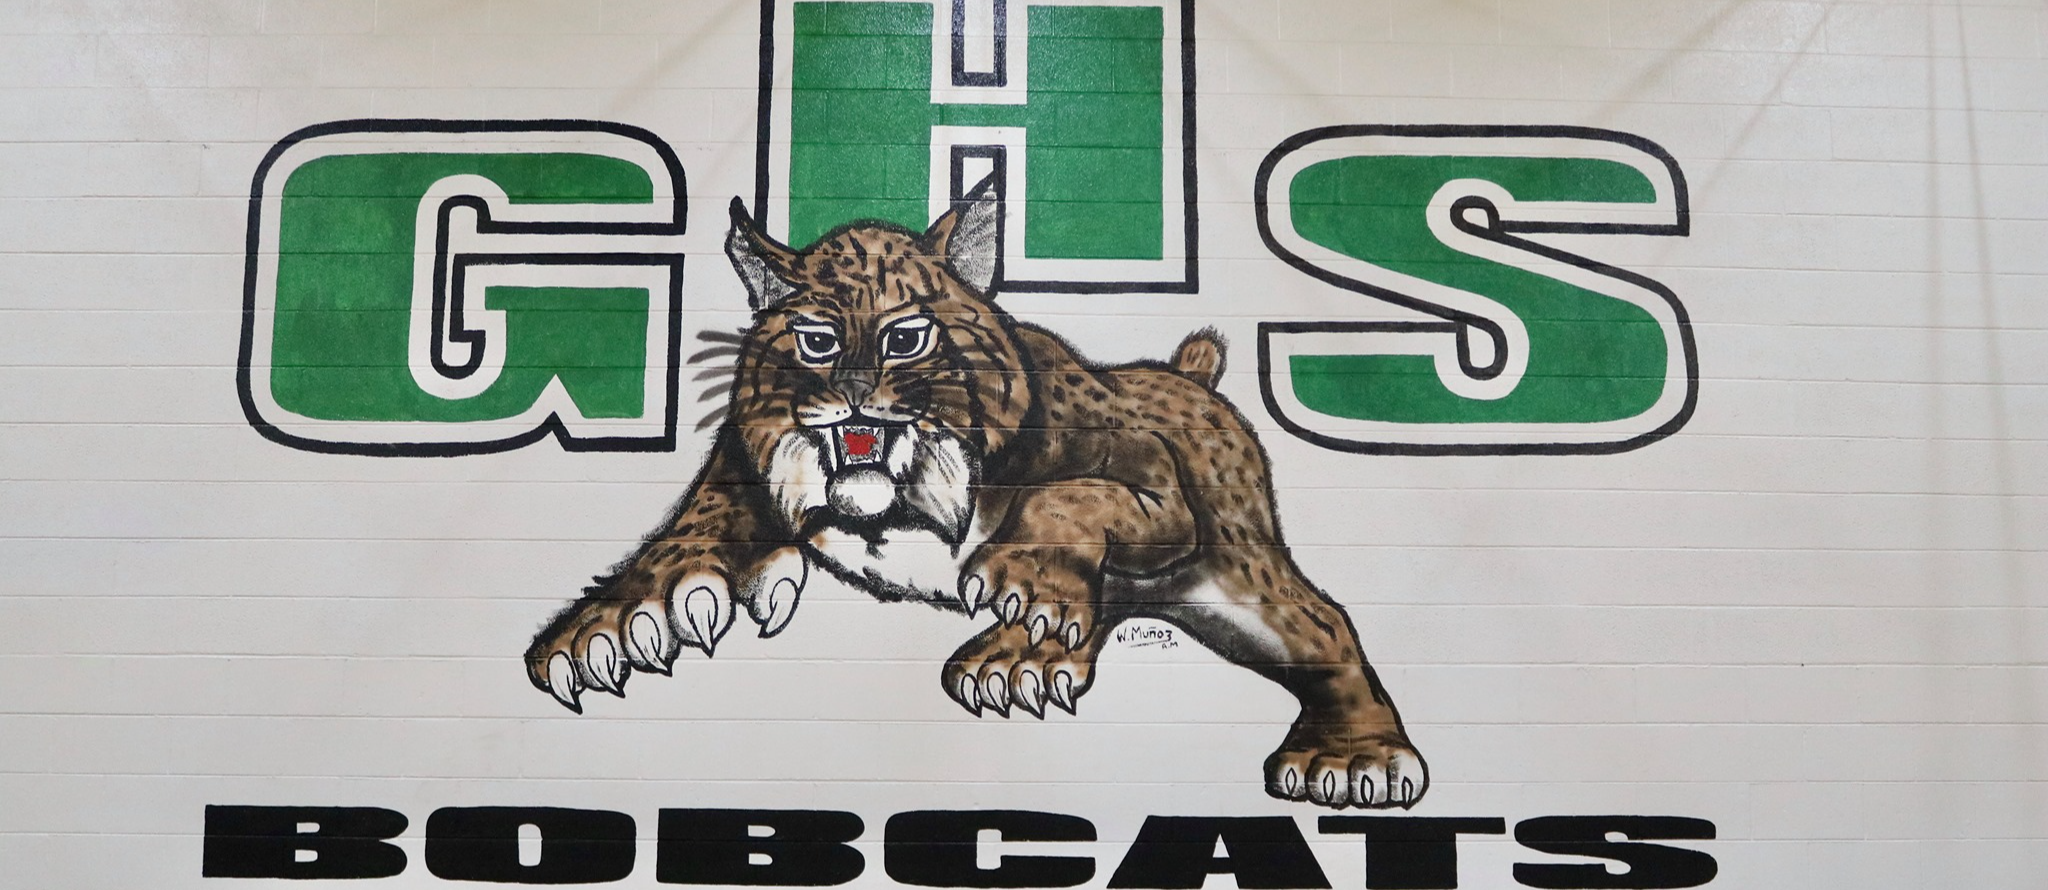 ghs bobcat painting on school wall